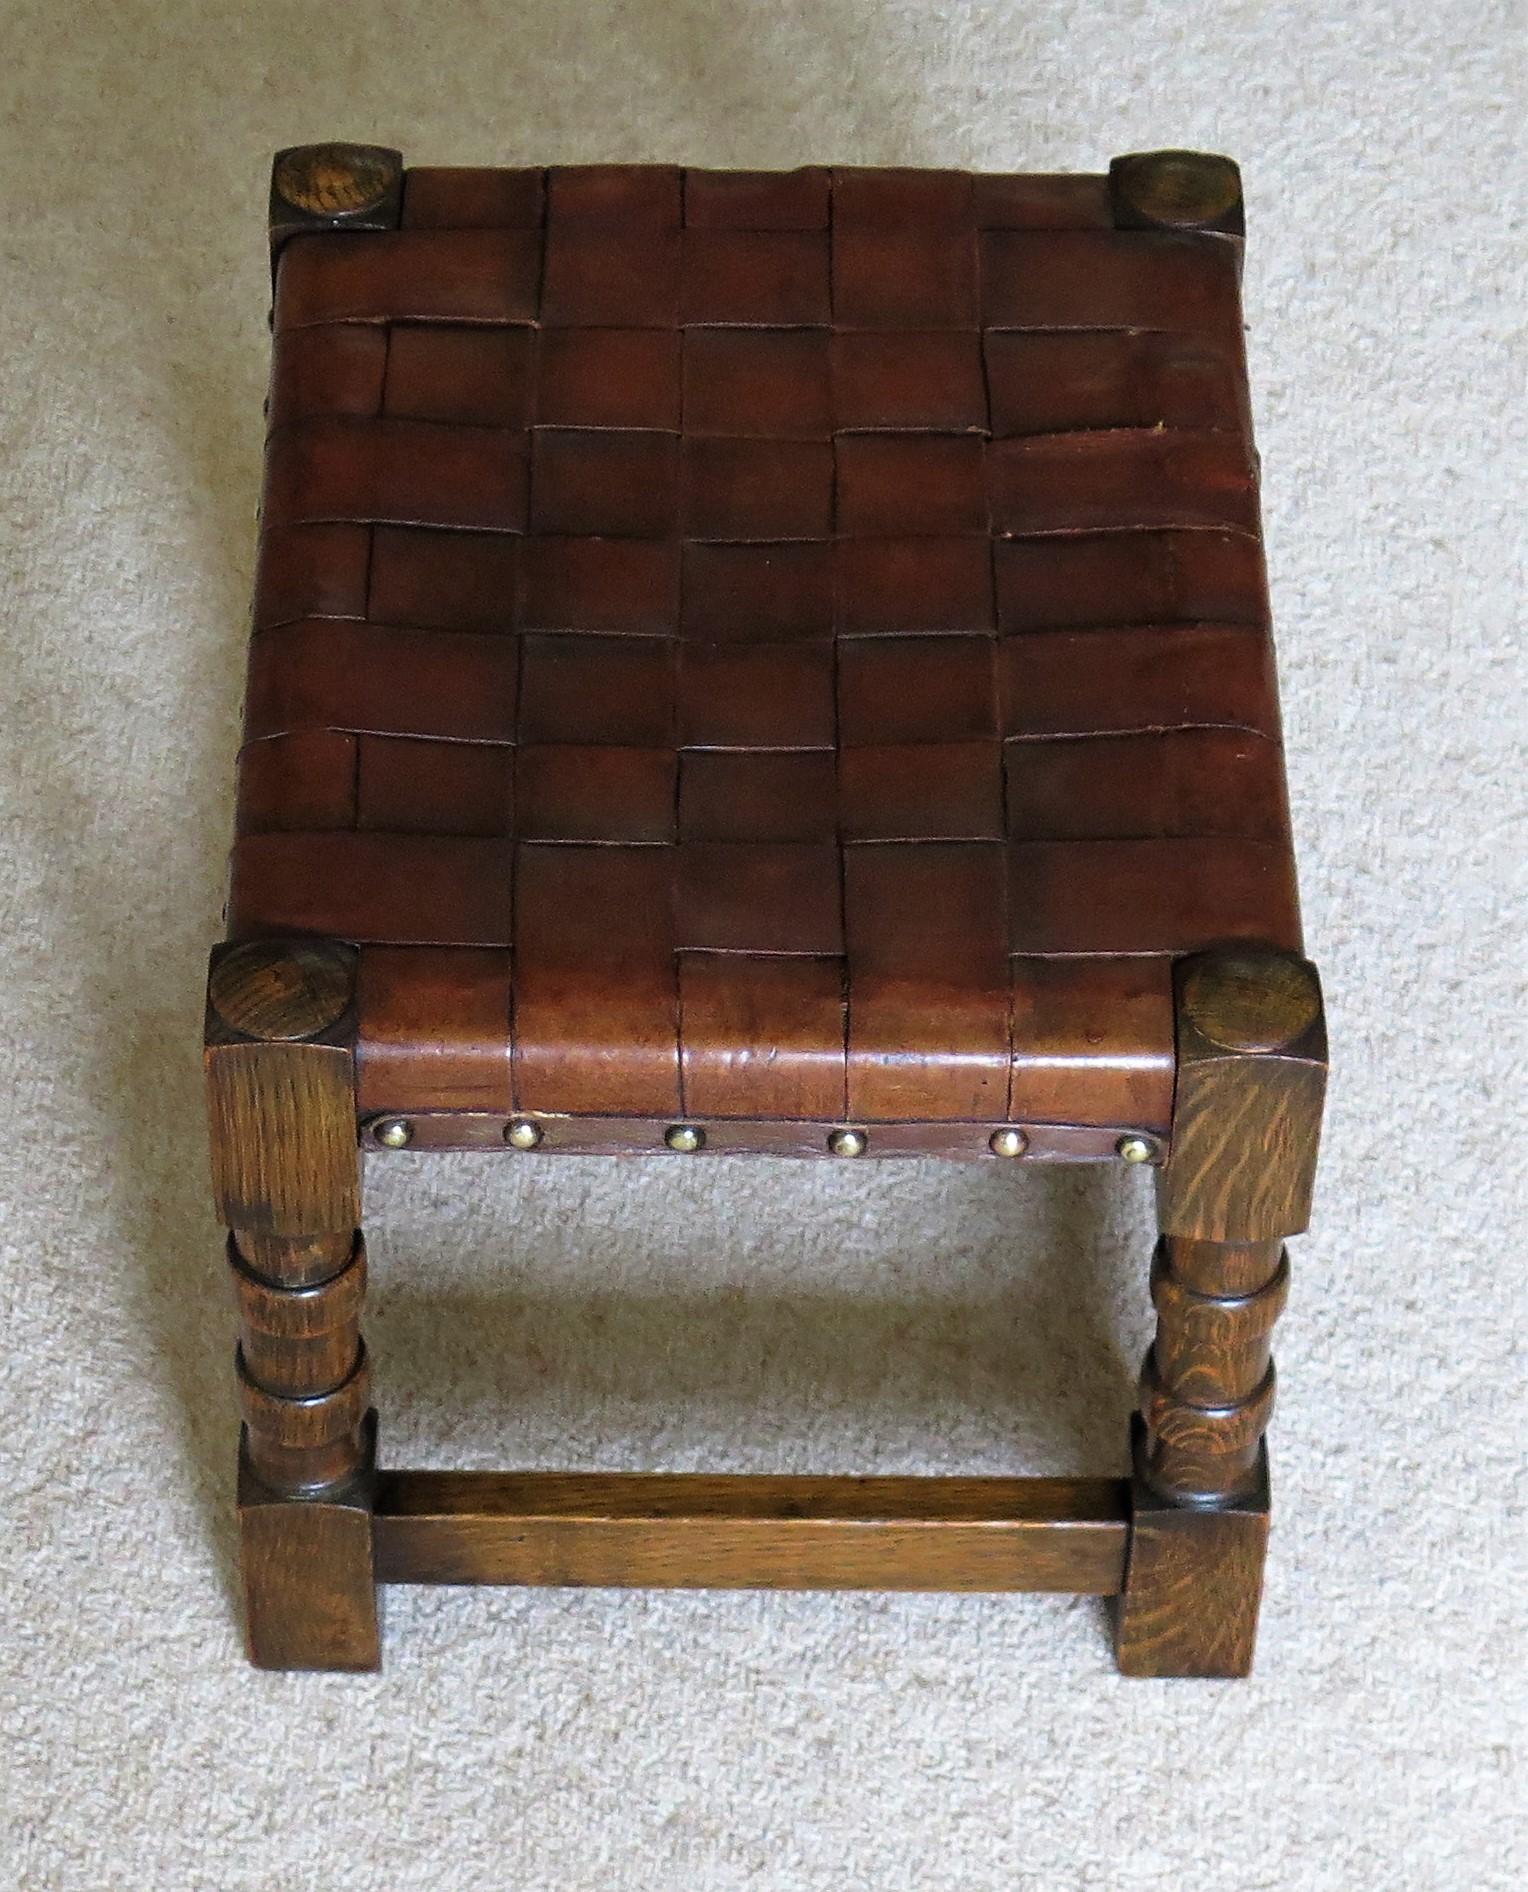 Fabric Handmade Oak Stool with Leather Strap Top, Arts & Crafts Late 19th Century For Sale